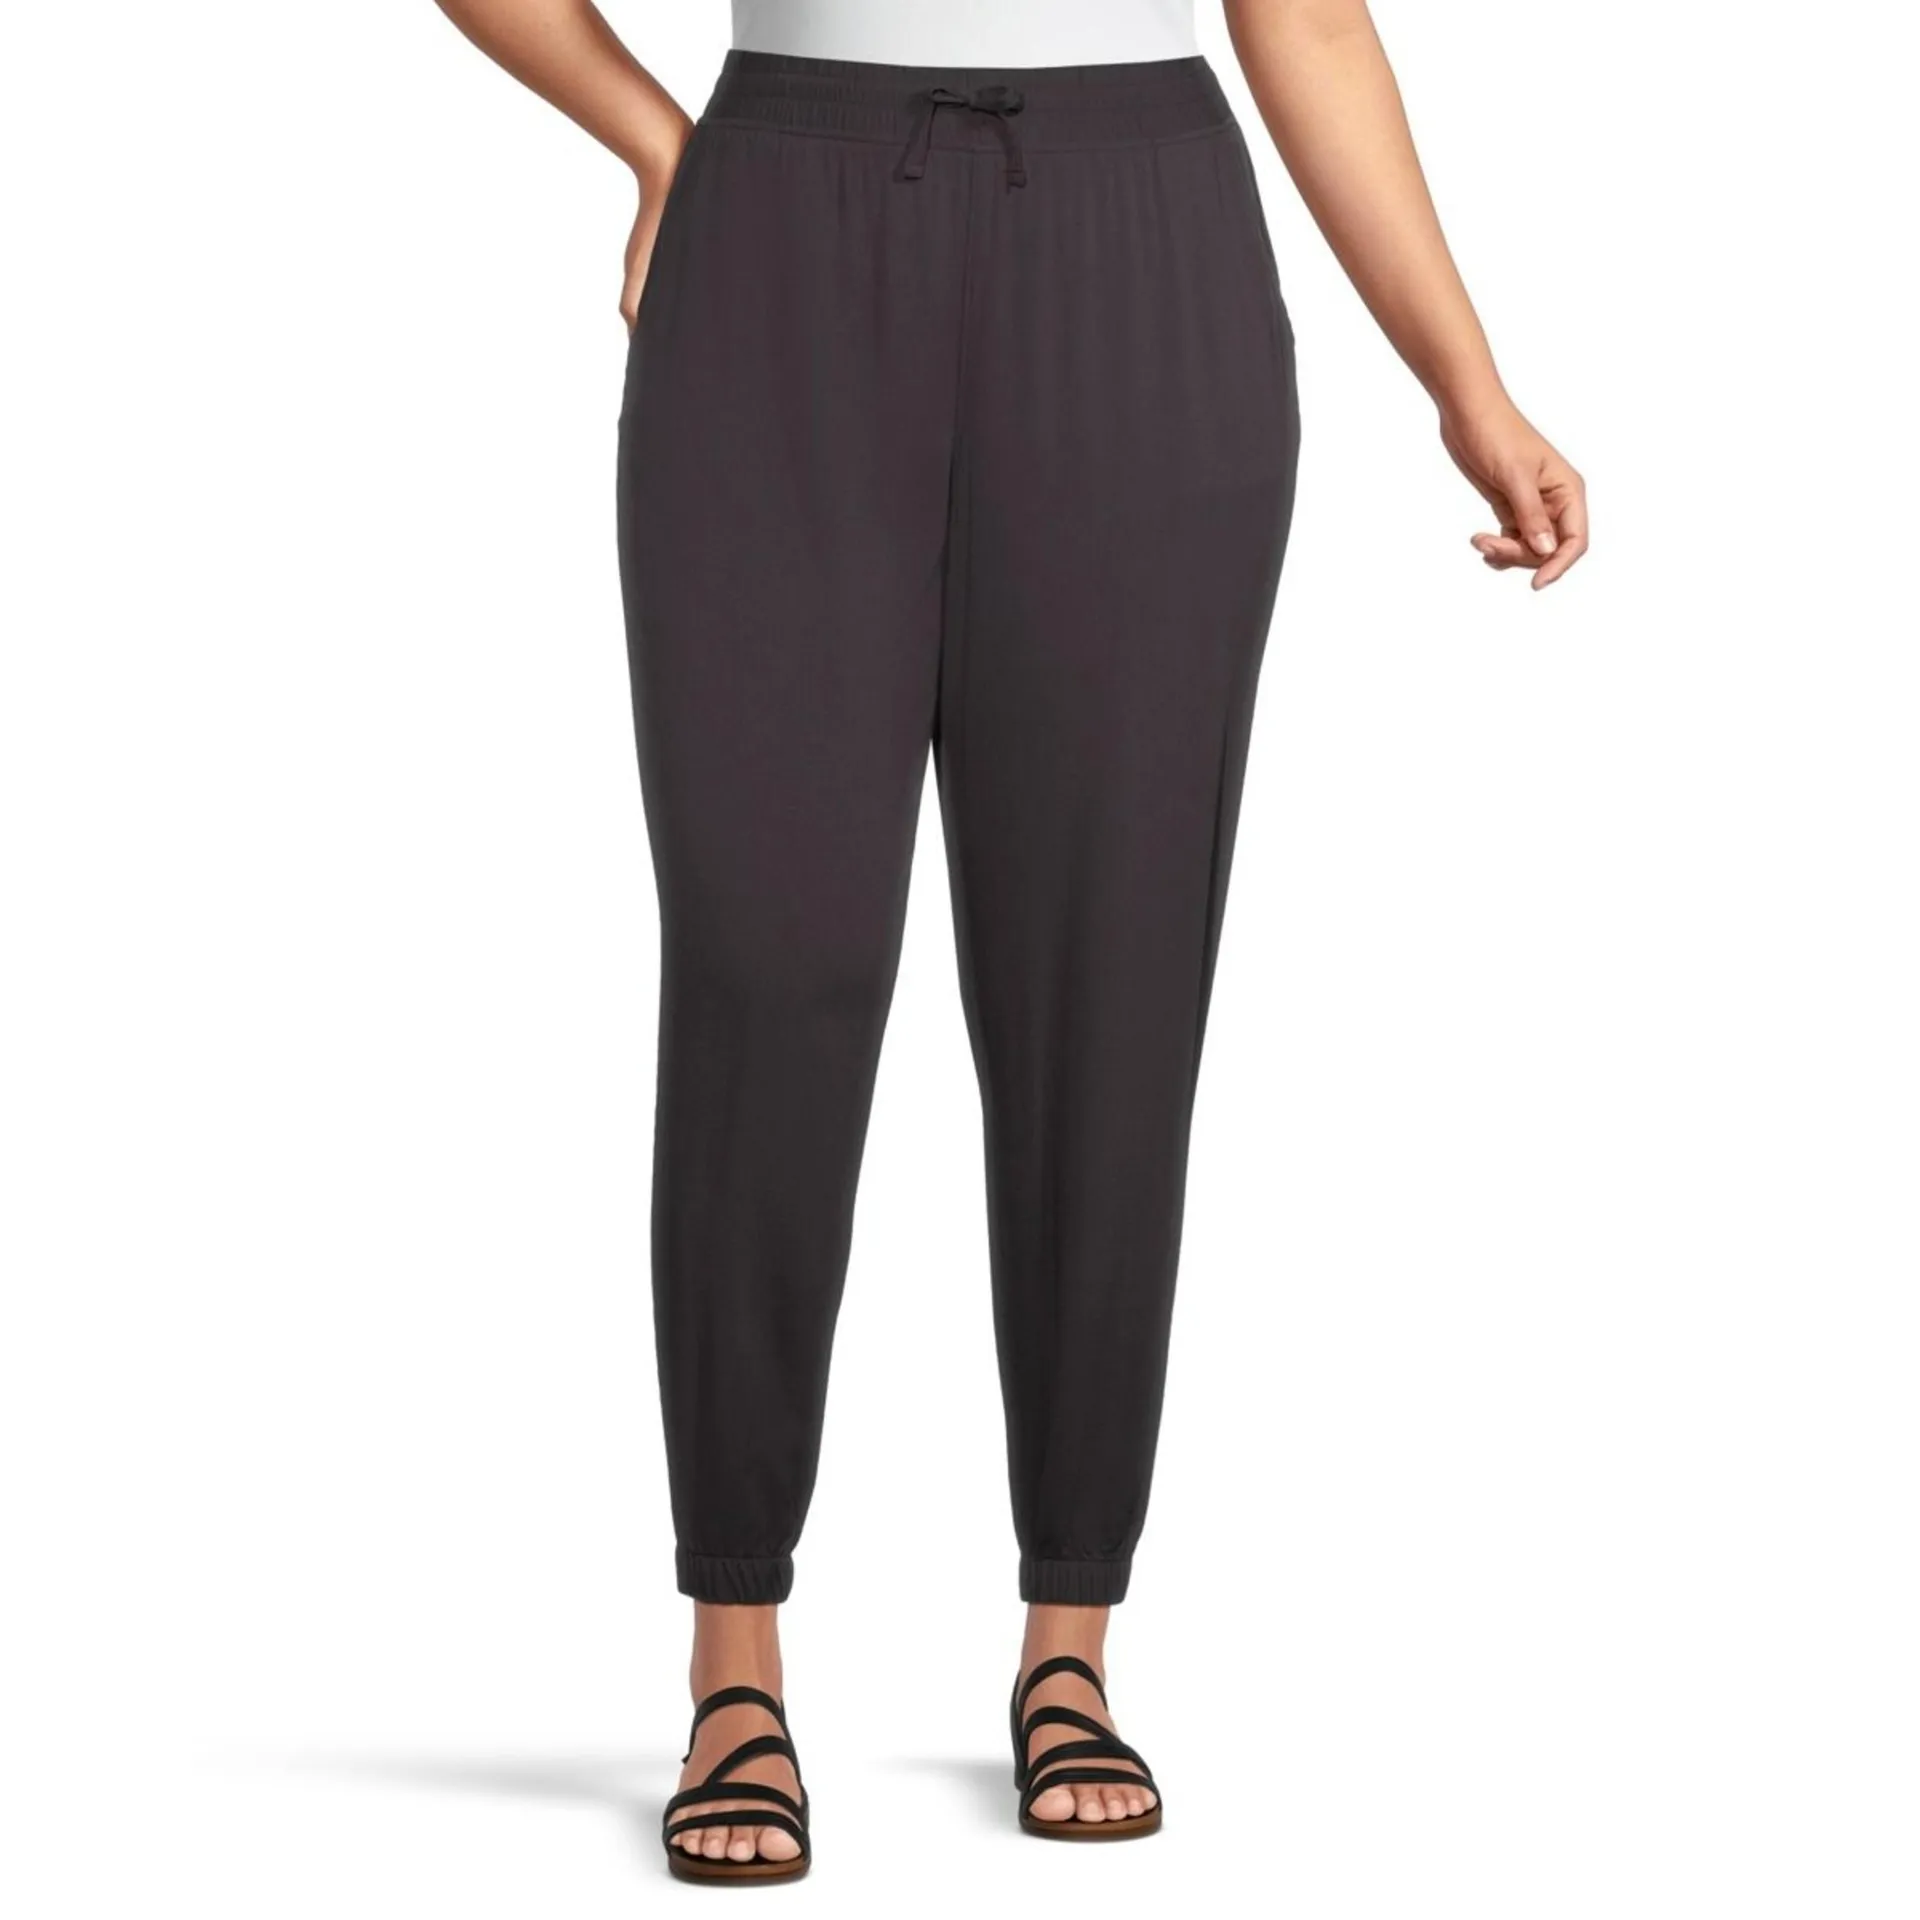 Ripzone Women's Stories Solid Pants